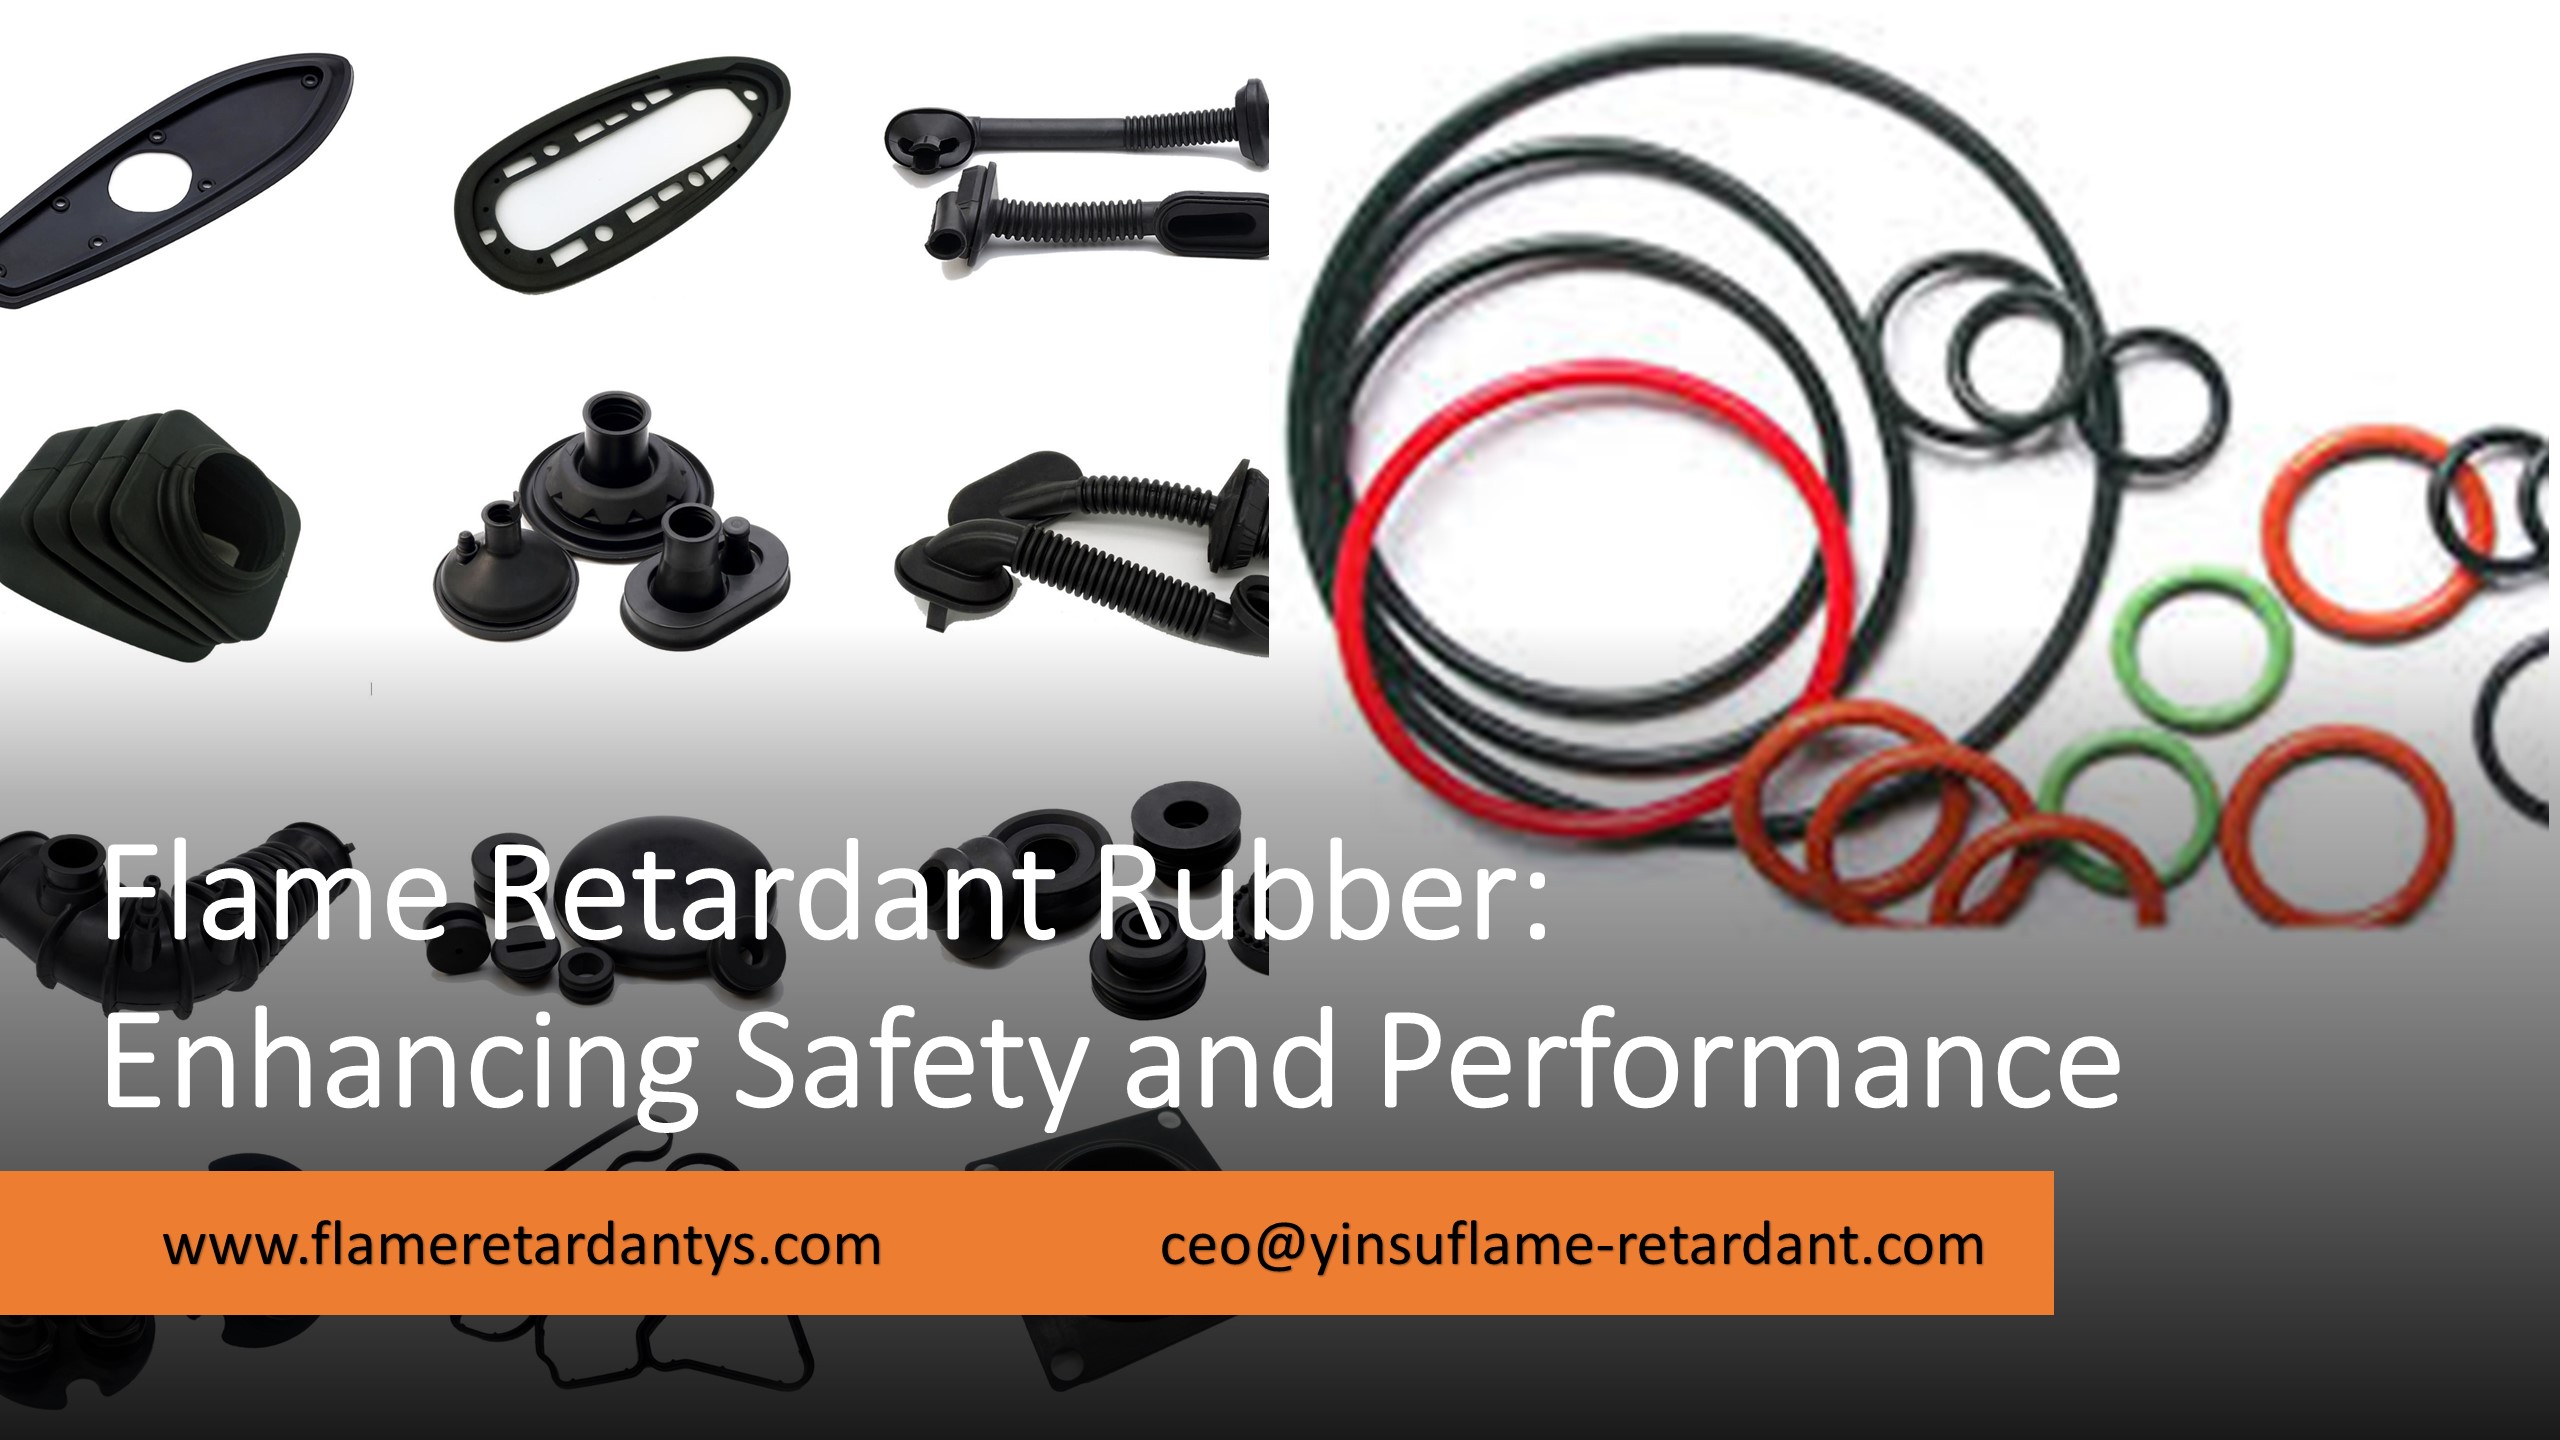 Flame Retardant Rubber: Enhancing Safety and Performance